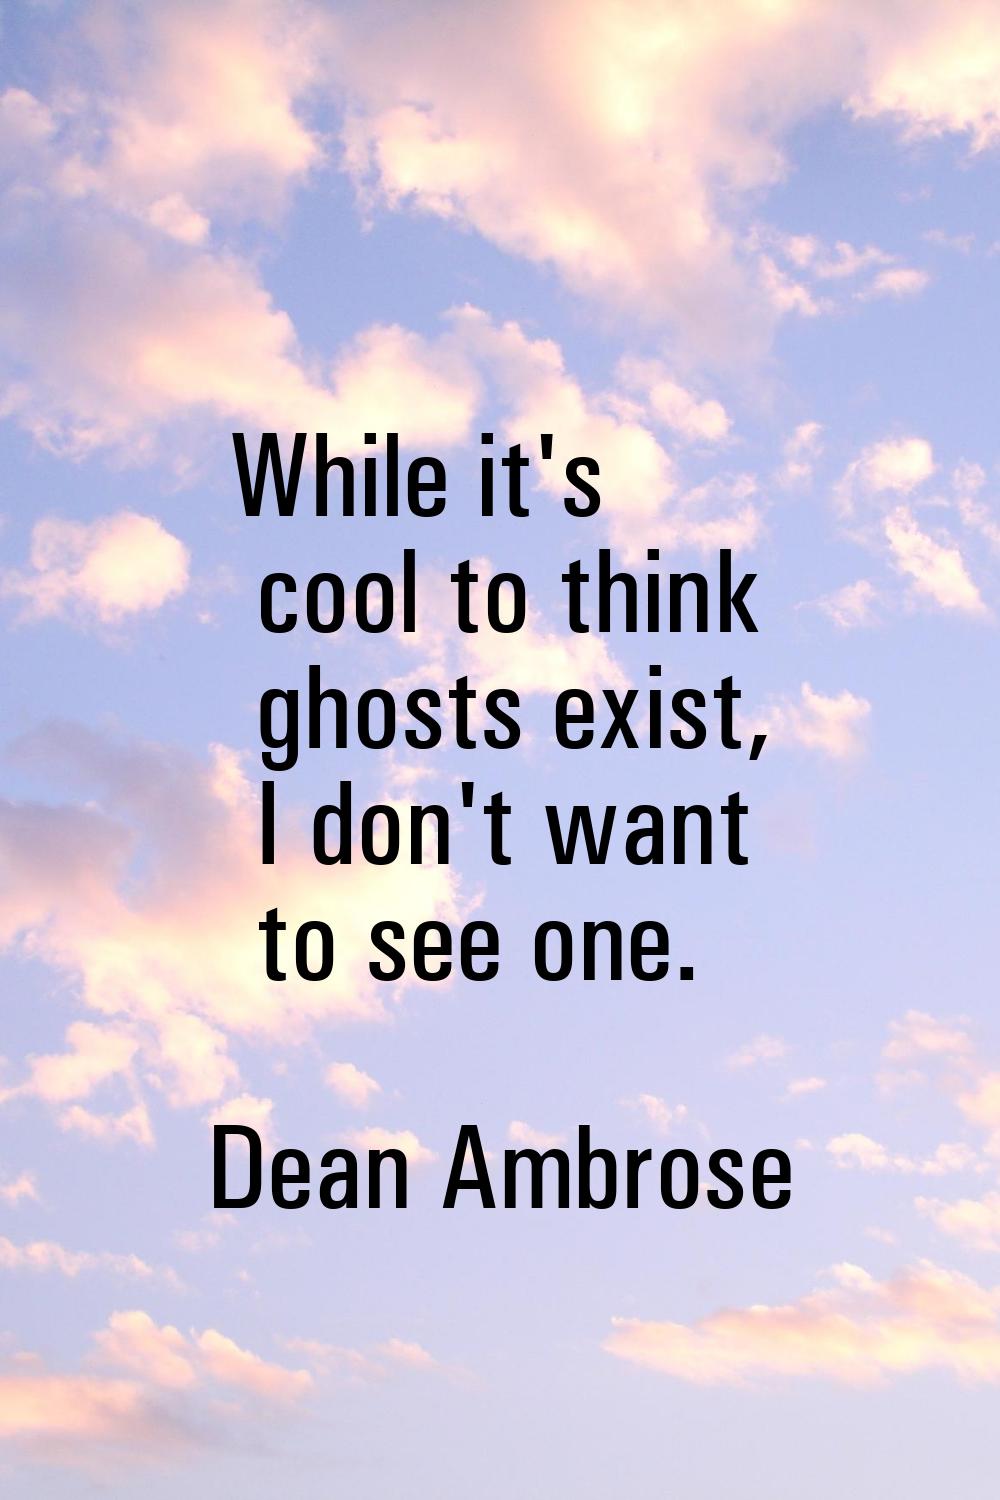 While it's cool to think ghosts exist, I don't want to see one.